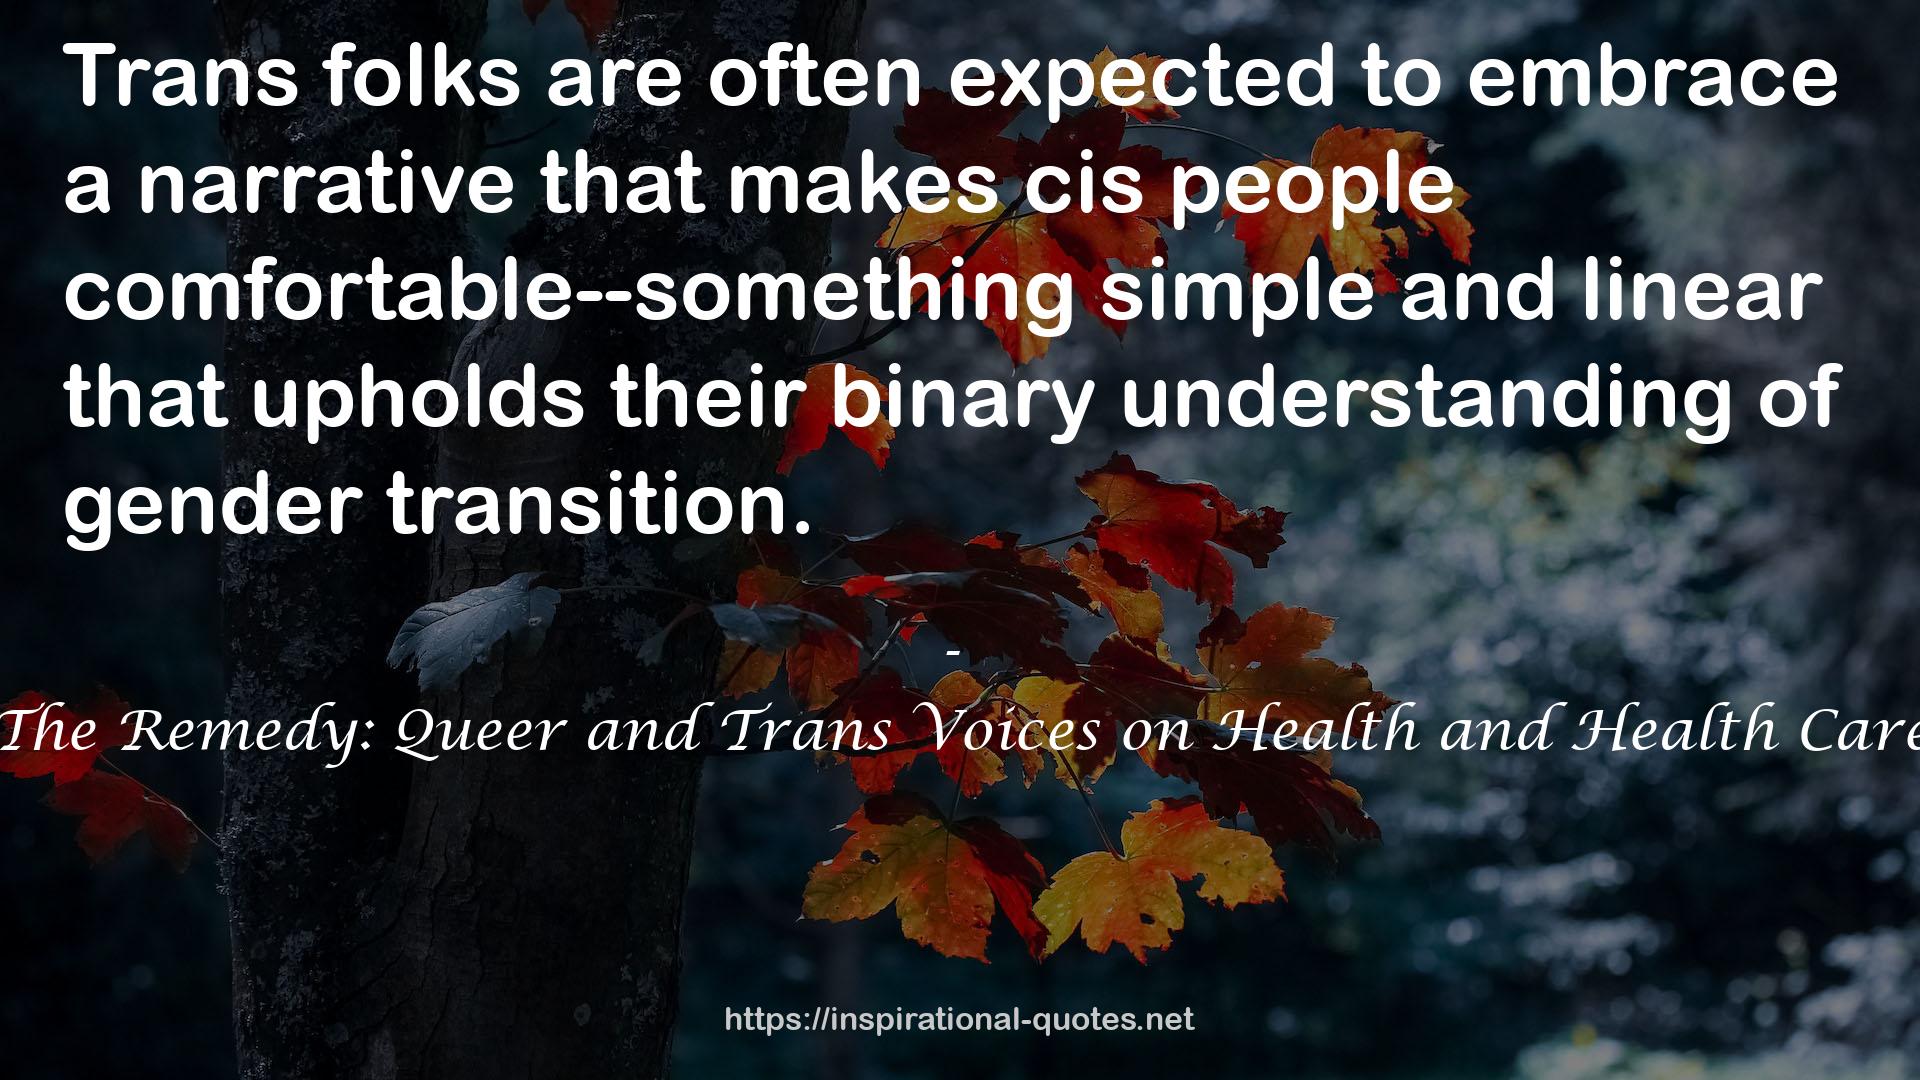 The Remedy: Queer and Trans Voices on Health and Health Care QUOTES